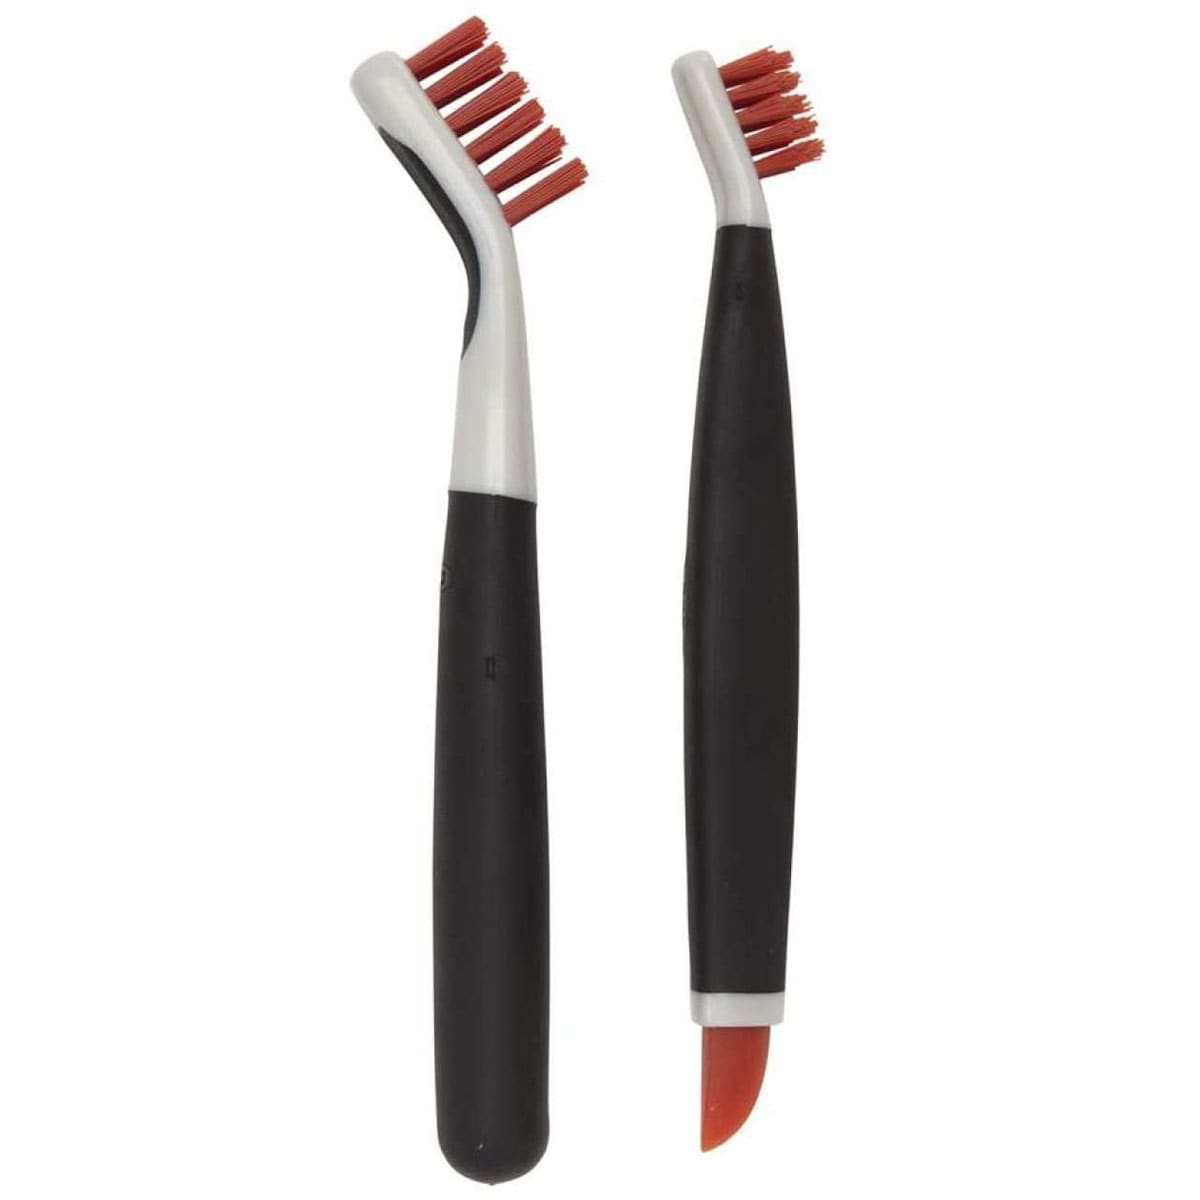 http://cdn.apartmenttherapy.info/image/upload/v1611771239/gen-workflow/product-database/oxo-good-grips-deep-clean-brushes.jpg